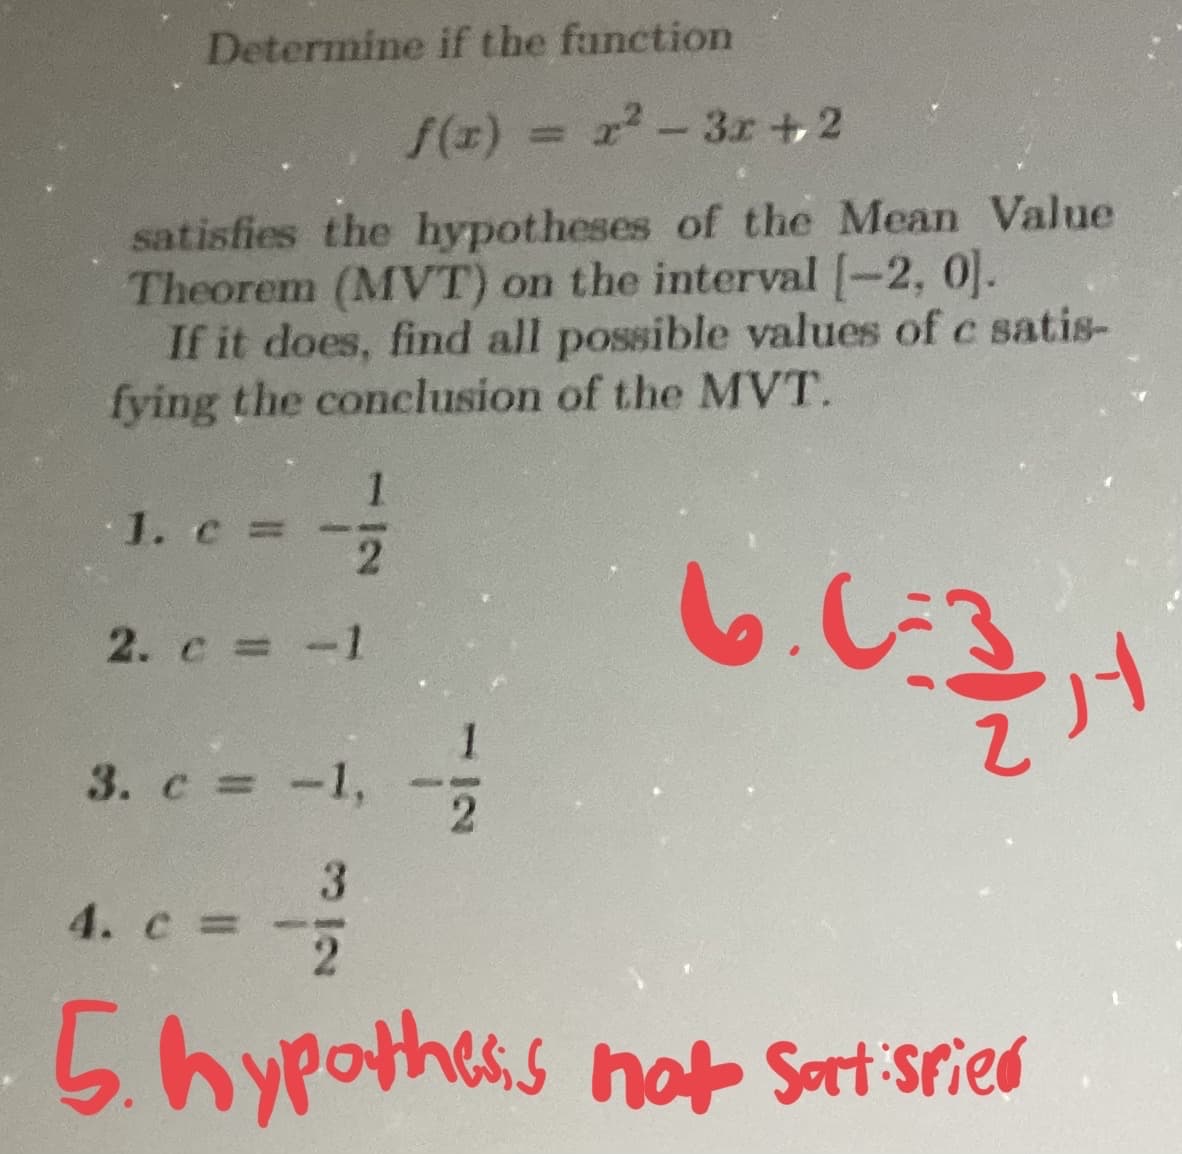 Determine if the function
f(x) = r²-3x+2
satisfies the hypotheses of the Mean Value
Theorem (MVT) on the interval [-2, 0].
If it does, find all possible values of c satis-
fying the conclusion of the MVT.
6.0:30, 1
1
2
2. c = -1
1. c =
3. c = -1,
3
4. c =
1
2
2
5. hypothesis not sort spied